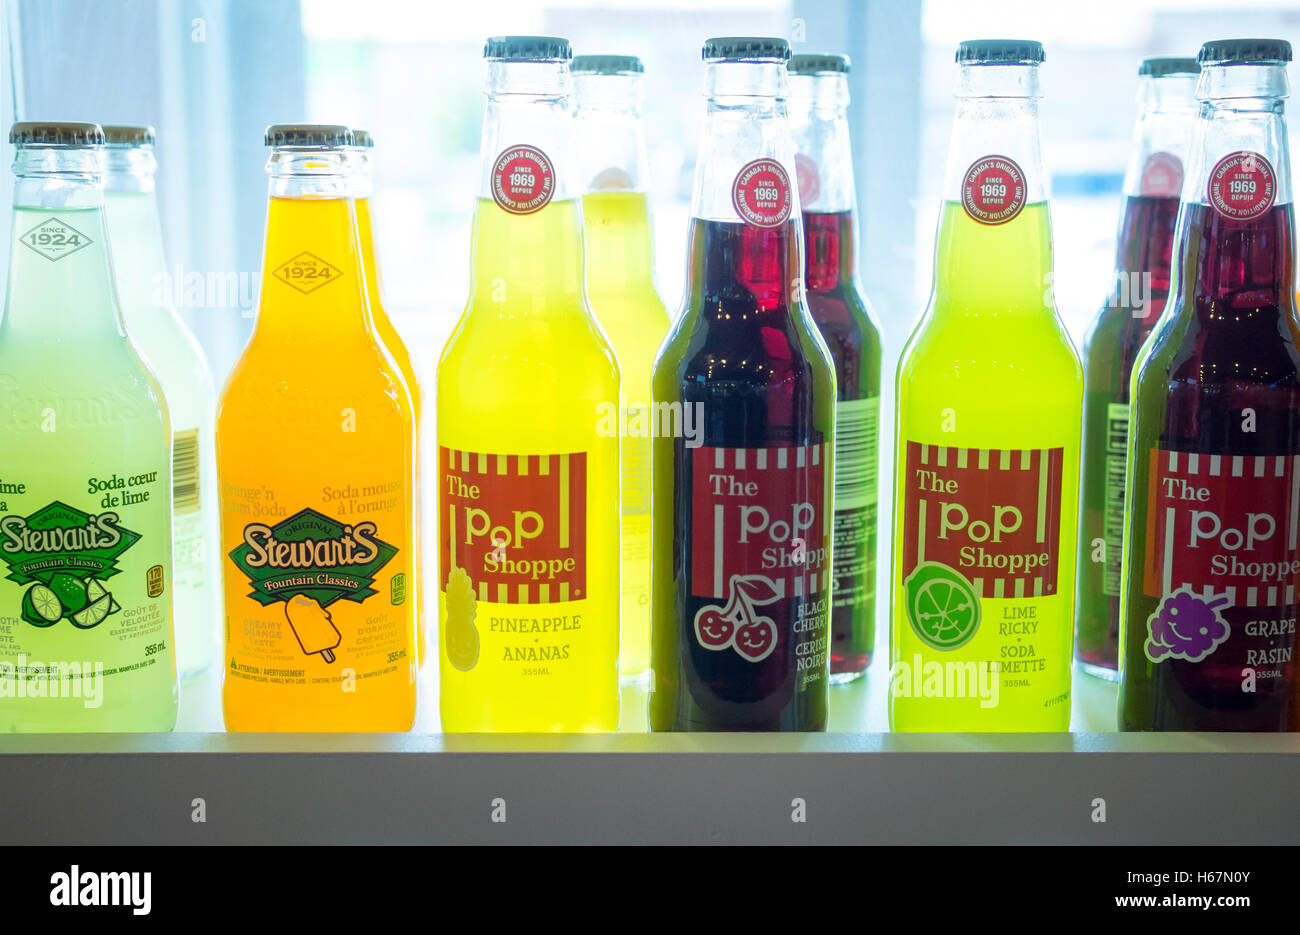 Multiple varieties of soda manufactured by The Pop Shoppe and Stewart's Fountain Classics. Stock Photo